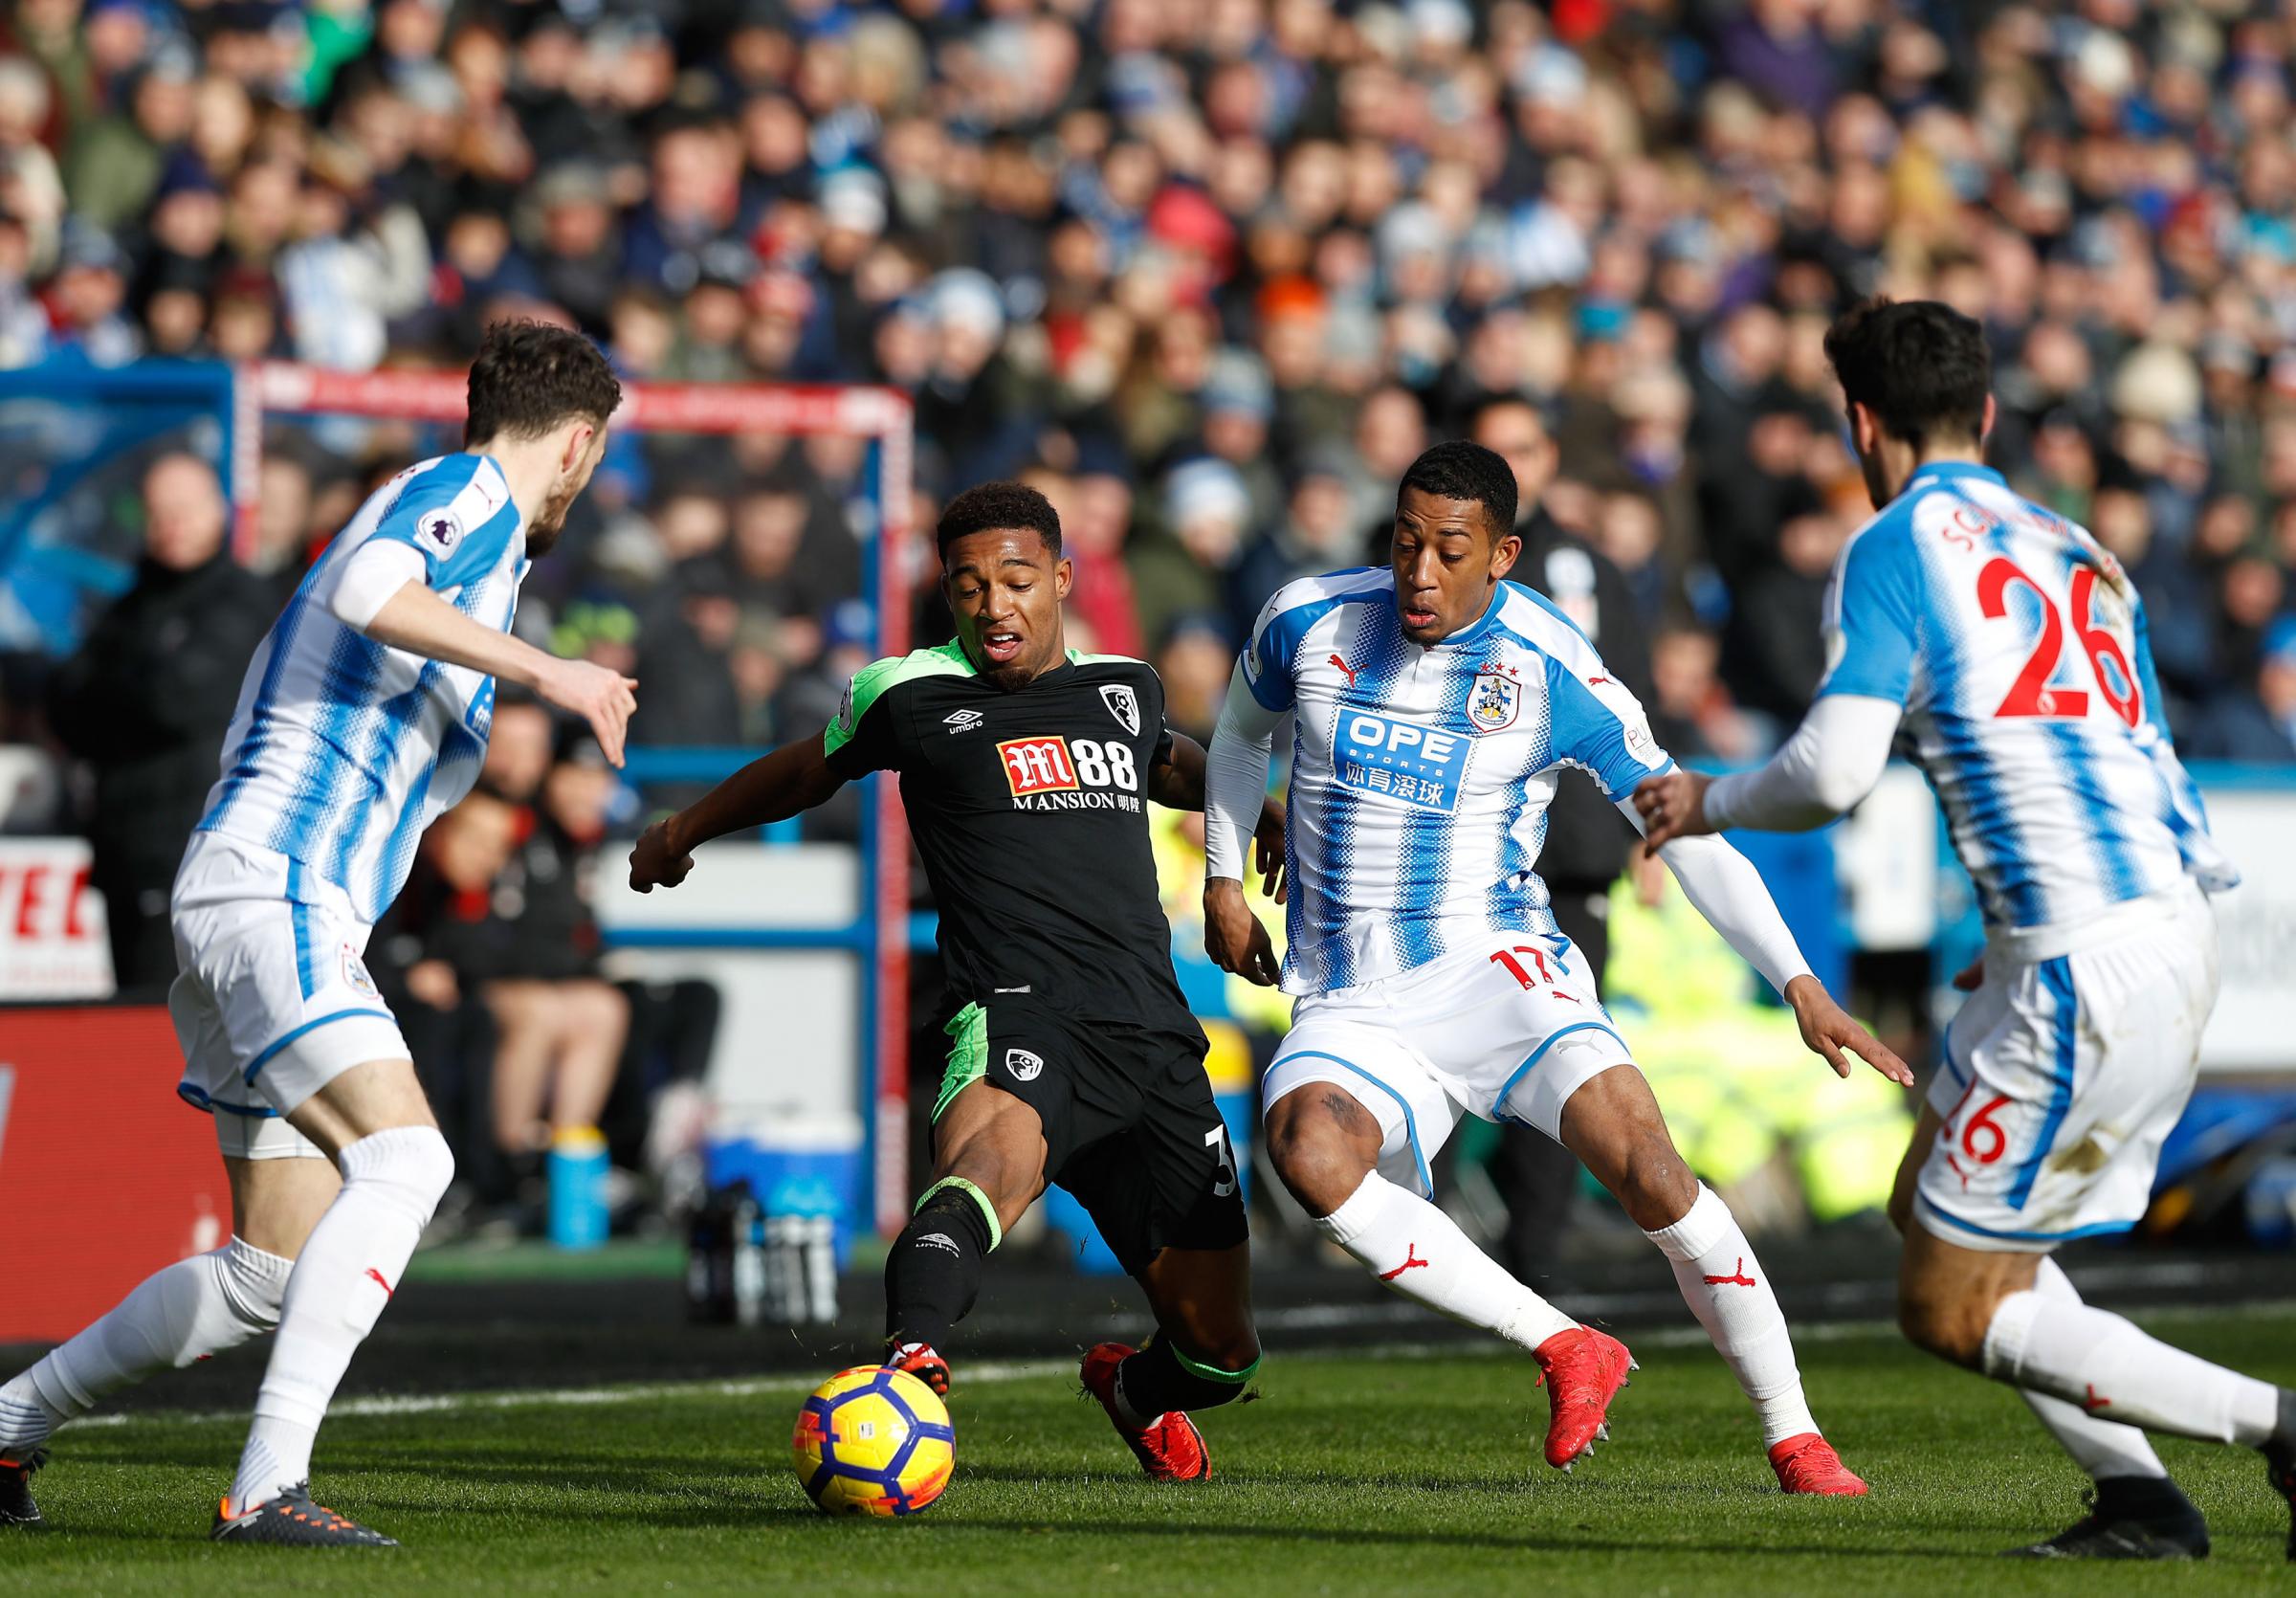 Jordon Ibe (middle left) battles Huddersfield Towns Rajiv van La Parra for the ball during the Premier League match at the John Smiths Stadium on February 11, 2018 (PA)